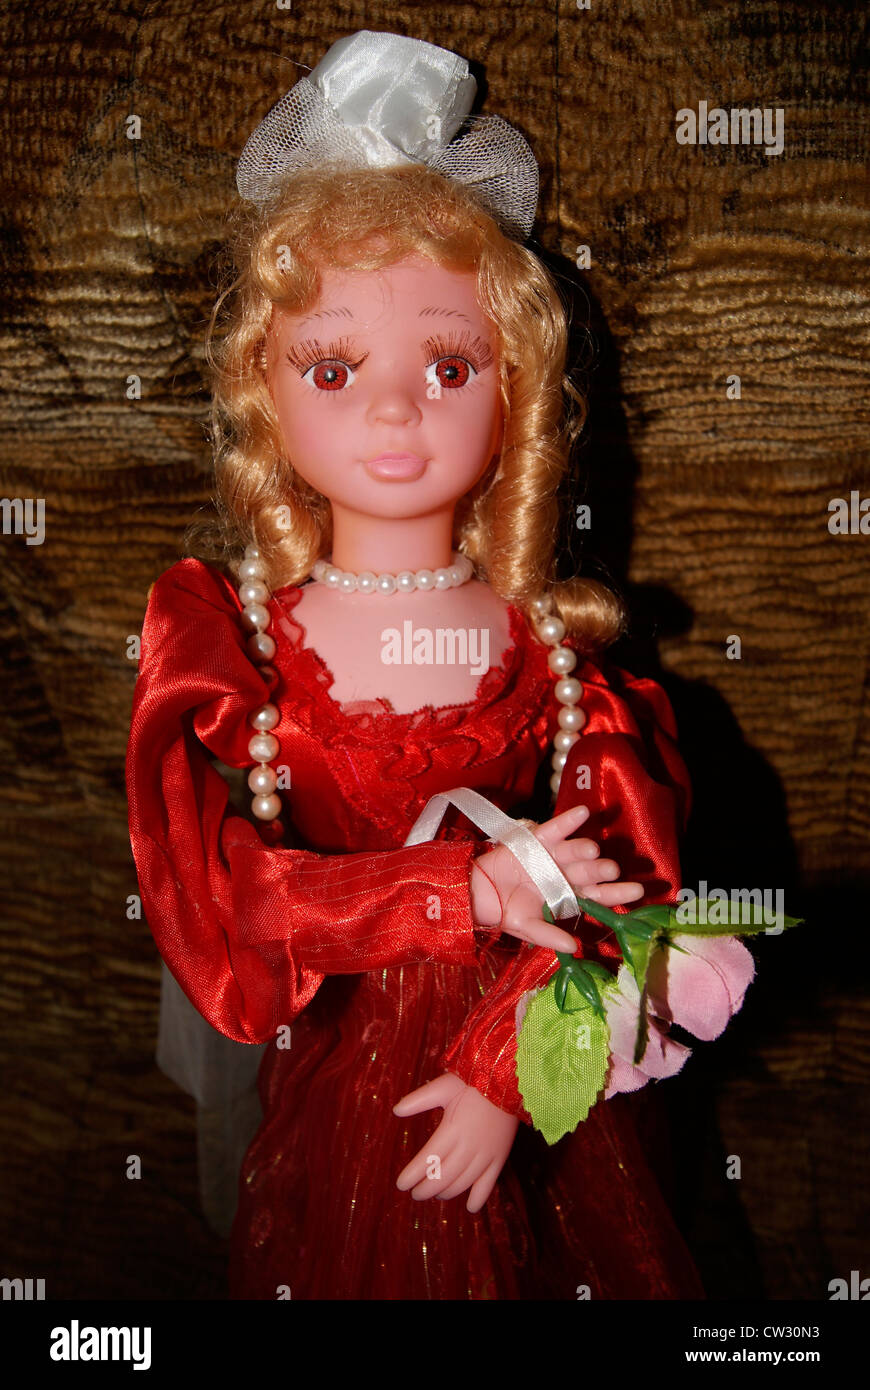 Barbie Doll girl toy in beautiful red Dress Stock Photo - Alamy